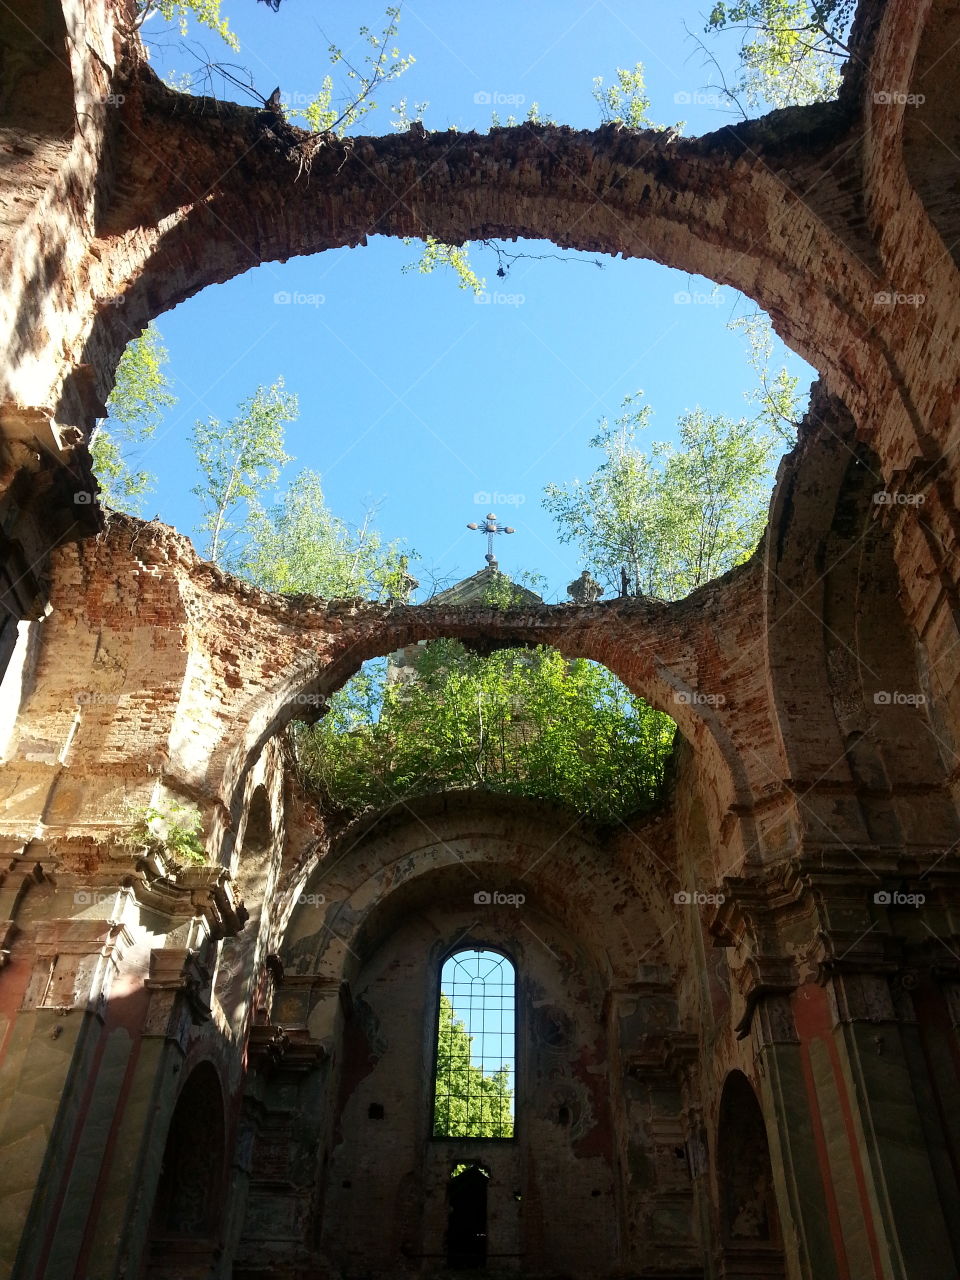 From inside the old Church